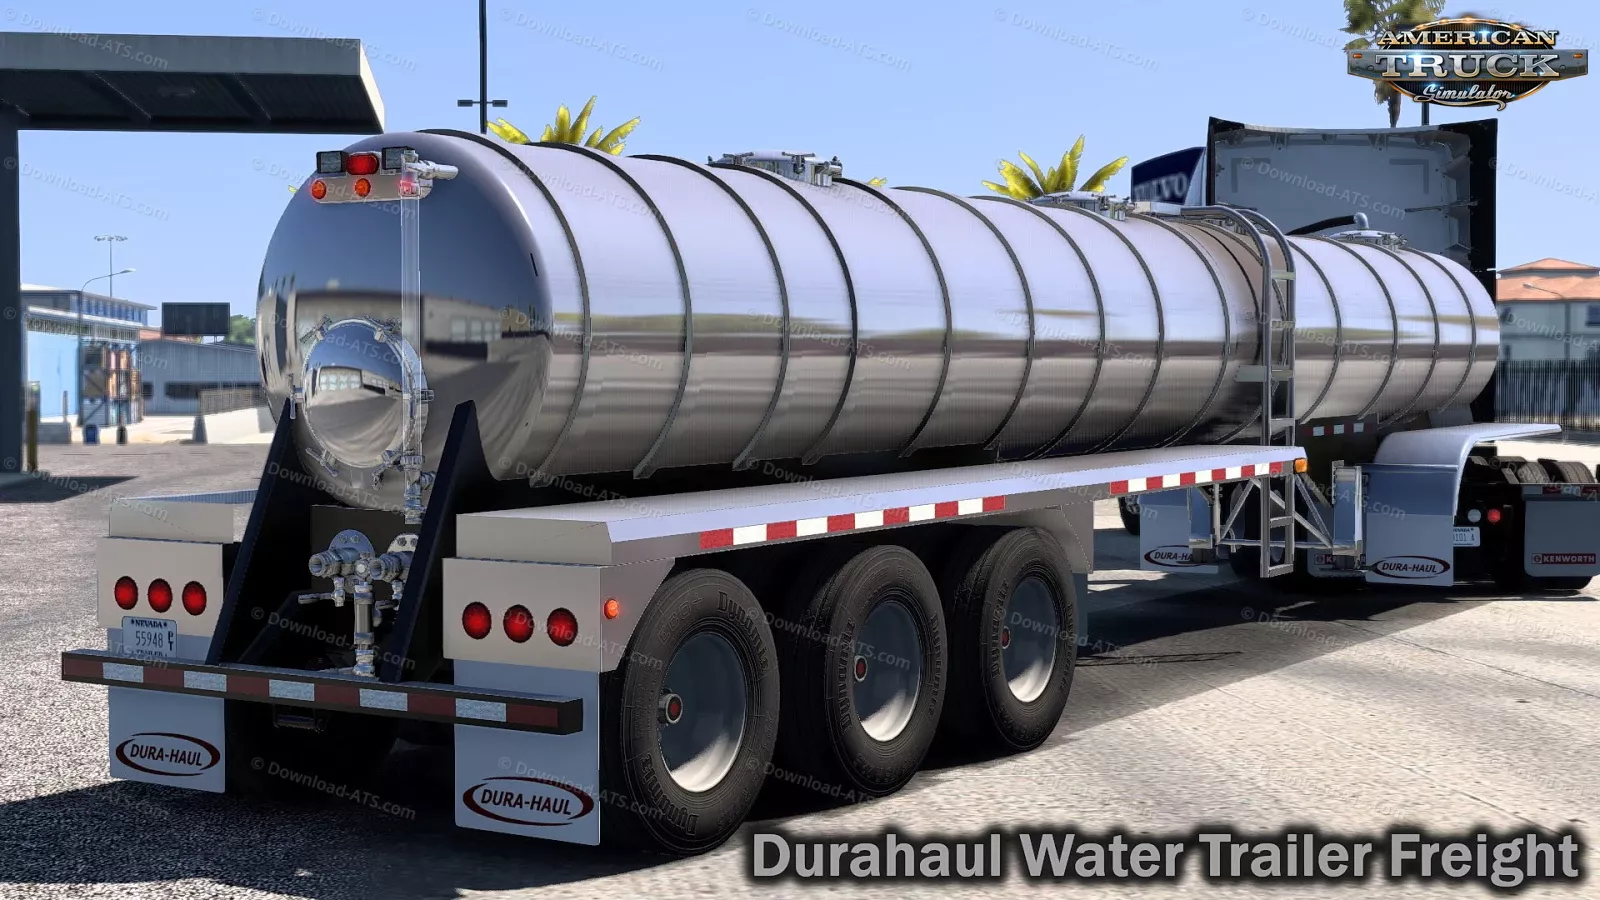 Durahaul Water Trailer Freight v1.4 (1.49.x) for ATS